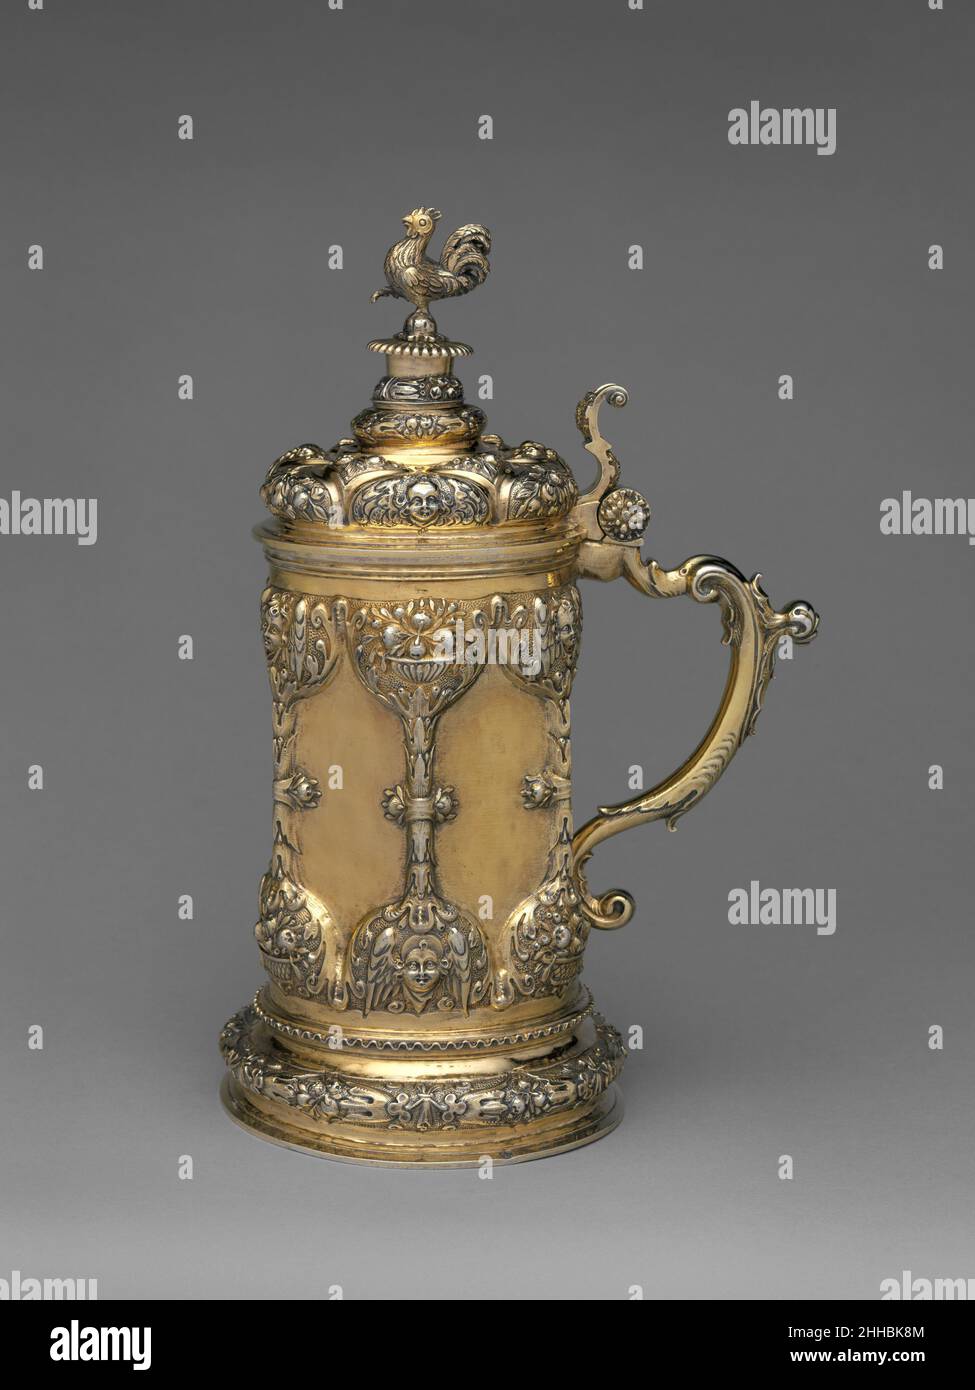 Tankard late 17th century Georgius Olescher Sr. It is unclear if this tankard was made for private use or if it was always intended to serve as a communion vessel, which was its function after it arrived in England. The overall ornamental symbolism is connected to vanity. Fruit and foliage represent life, and stylized hourglass motifs divide the main body into six plain panels (for this vanity tradition see, Wolfram Koeppe. Die Lemmers-Danforth Sammling Wetzlar. Heidelberg, 1992, pp. 464-465, cat. GO 8). The cast finial plinth supports a cockerel standing on one foot, a pose adopted by the bir Stock Photo